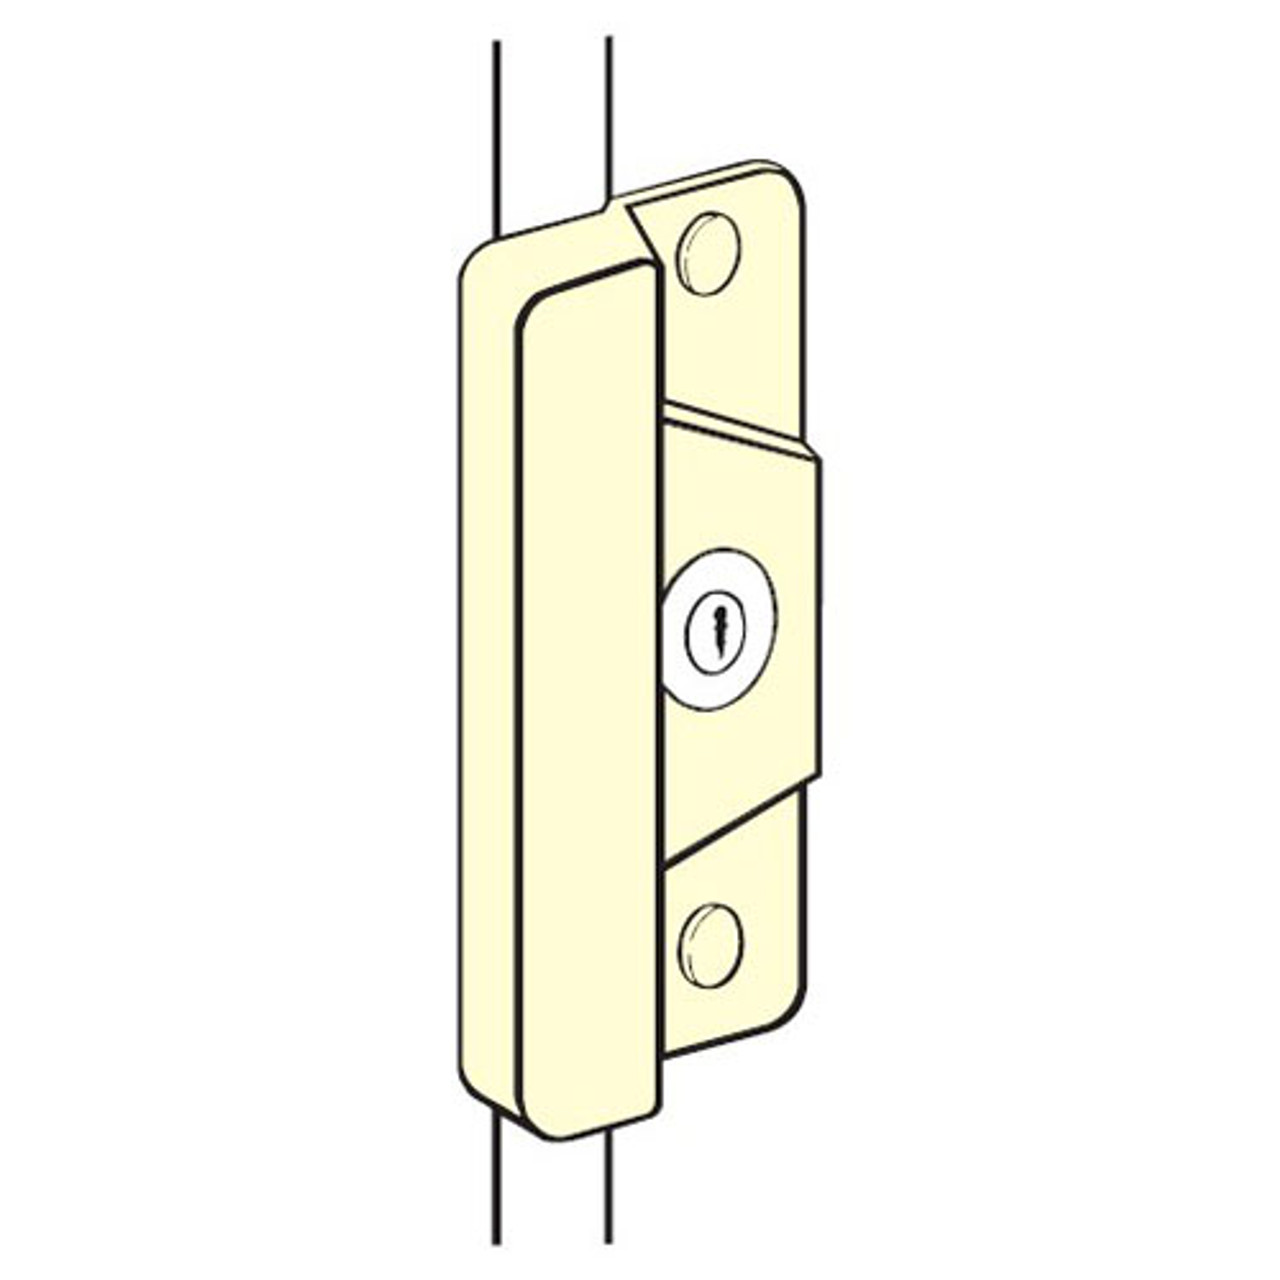 ELP-208P-DU Don Jo Latch Protector for Electric Strikes in Duro Coated Finish